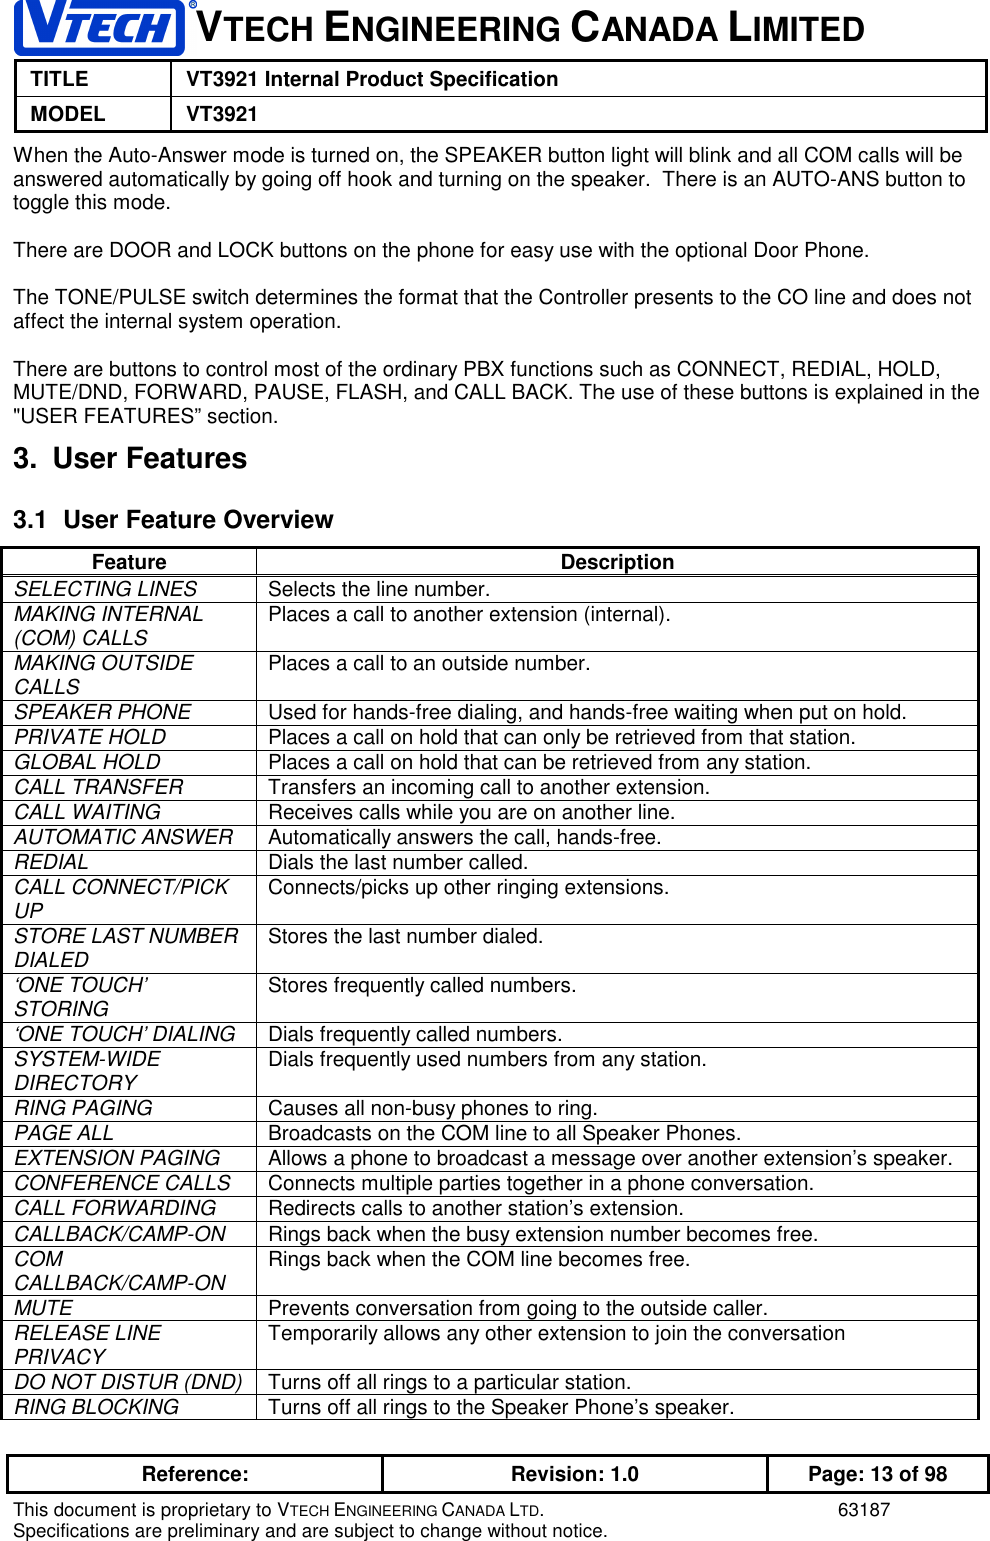 1VTECH ENGINEERING CANADA LIMITEDTITLE VT3921 Internal Product SpecificationMODEL VT3921Reference: Revision: 1.0 Page: 13 of 98This document is proprietary to VTECH ENGINEERING CANADA LTD. 63187Specifications are preliminary and are subject to change without notice.When the Auto-Answer mode is turned on, the SPEAKER button light will blink and all COM calls will beanswered automatically by going off hook and turning on the speaker.  There is an AUTO-ANS button totoggle this mode.There are DOOR and LOCK buttons on the phone for easy use with the optional Door Phone.The TONE/PULSE switch determines the format that the Controller presents to the CO line and does notaffect the internal system operation.There are buttons to control most of the ordinary PBX functions such as CONNECT, REDIAL, HOLD,MUTE/DND, FORWARD, PAUSE, FLASH, and CALL BACK. The use of these buttons is explained in the&quot;USER FEATURES” section.3. User Features3.1  User Feature OverviewFeature DescriptionSELECTING LINES Selects the line number.MAKING INTERNAL(COM) CALLS Places a call to another extension (internal).MAKING OUTSIDECALLS Places a call to an outside number.SPEAKER PHONE Used for hands-free dialing, and hands-free waiting when put on hold.PRIVATE HOLD Places a call on hold that can only be retrieved from that station.GLOBAL HOLD Places a call on hold that can be retrieved from any station.CALL TRANSFER Transfers an incoming call to another extension.CALL WAITING Receives calls while you are on another line.AUTOMATIC ANSWER Automatically answers the call, hands-free.REDIAL Dials the last number called.CALL CONNECT/PICKUP Connects/picks up other ringing extensions.STORE LAST NUMBERDIALED Stores the last number dialed.‘ONE TOUCH’STORING Stores frequently called numbers.‘ONE TOUCH’ DIALING Dials frequently called numbers.SYSTEM-WIDEDIRECTORY Dials frequently used numbers from any station.RING PAGING Causes all non-busy phones to ring.PAGE ALL Broadcasts on the COM line to all Speaker Phones.EXTENSION PAGING Allows a phone to broadcast a message over another extension’s speaker.CONFERENCE CALLS Connects multiple parties together in a phone conversation.CALL FORWARDING Redirects calls to another station’s extension.CALLBACK/CAMP-ON Rings back when the busy extension number becomes free.COMCALLBACK/CAMP-ON Rings back when the COM line becomes free.MUTE Prevents conversation from going to the outside caller.RELEASE LINEPRIVACY Temporarily allows any other extension to join the conversationDO NOT DISTUR (DND) Turns off all rings to a particular station.RING BLOCKING Turns off all rings to the Speaker Phone’s speaker.